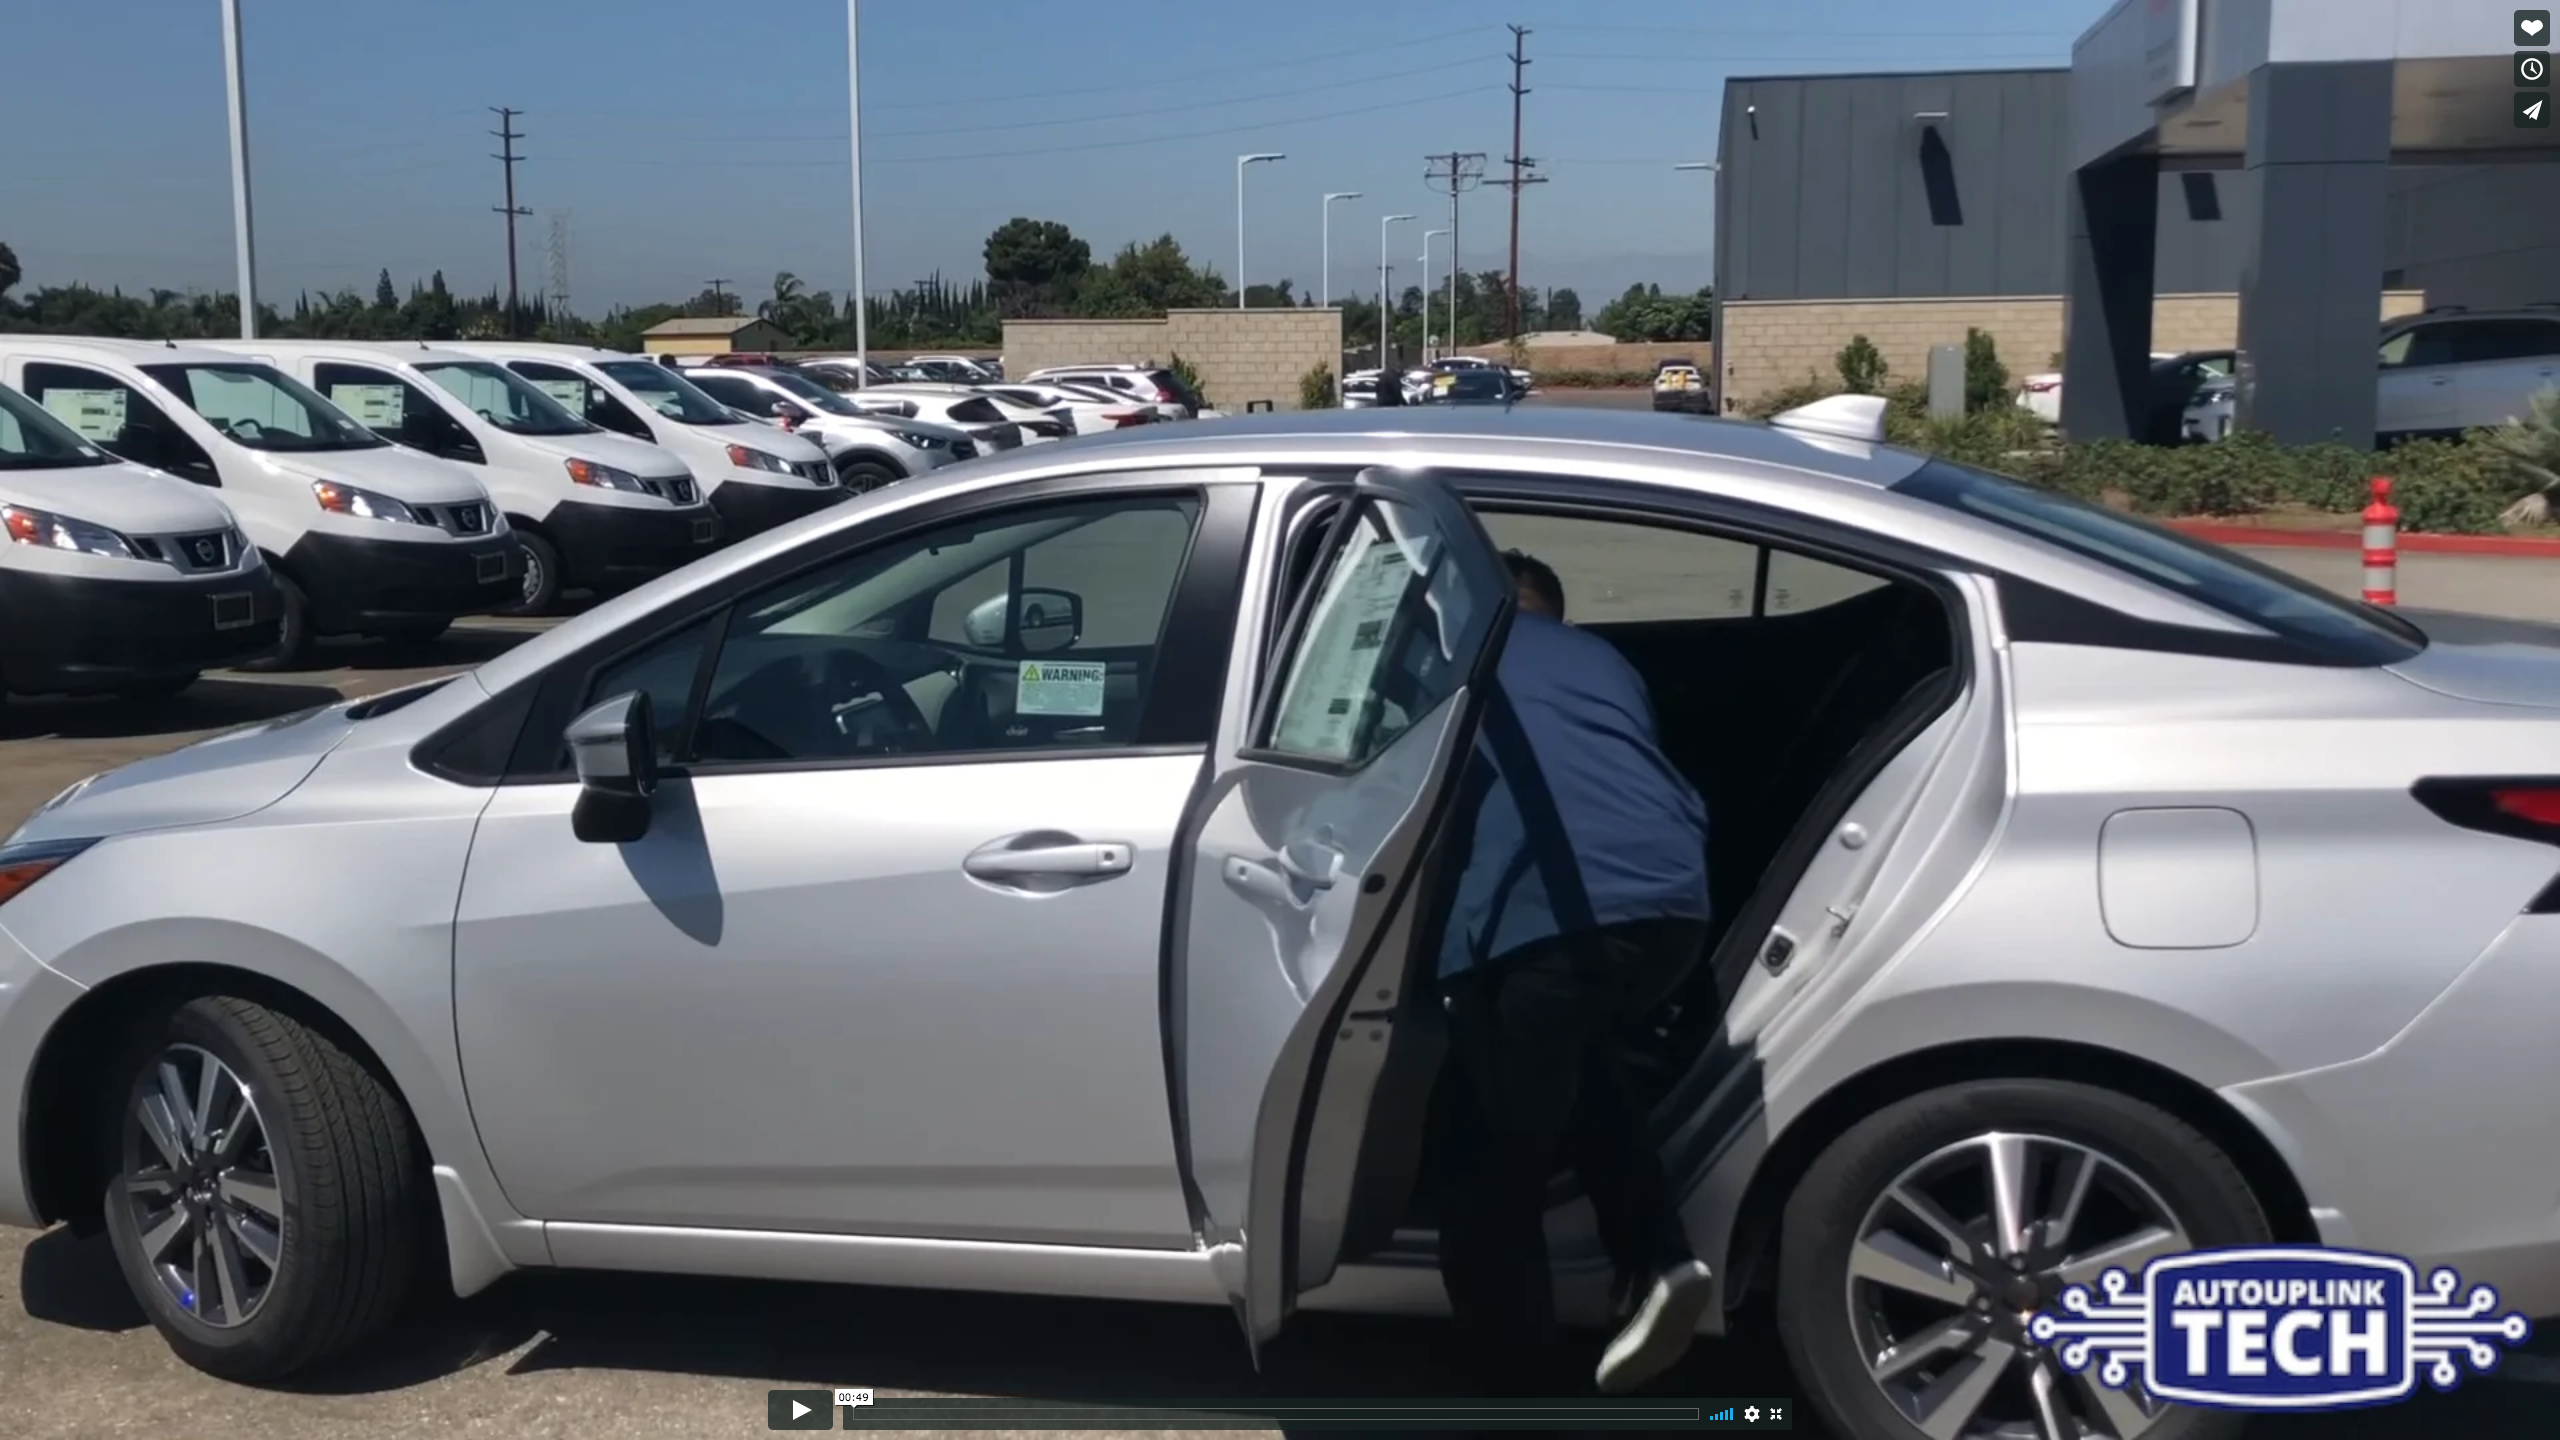 Photo of a person filming a dealership vehicle using Video 360